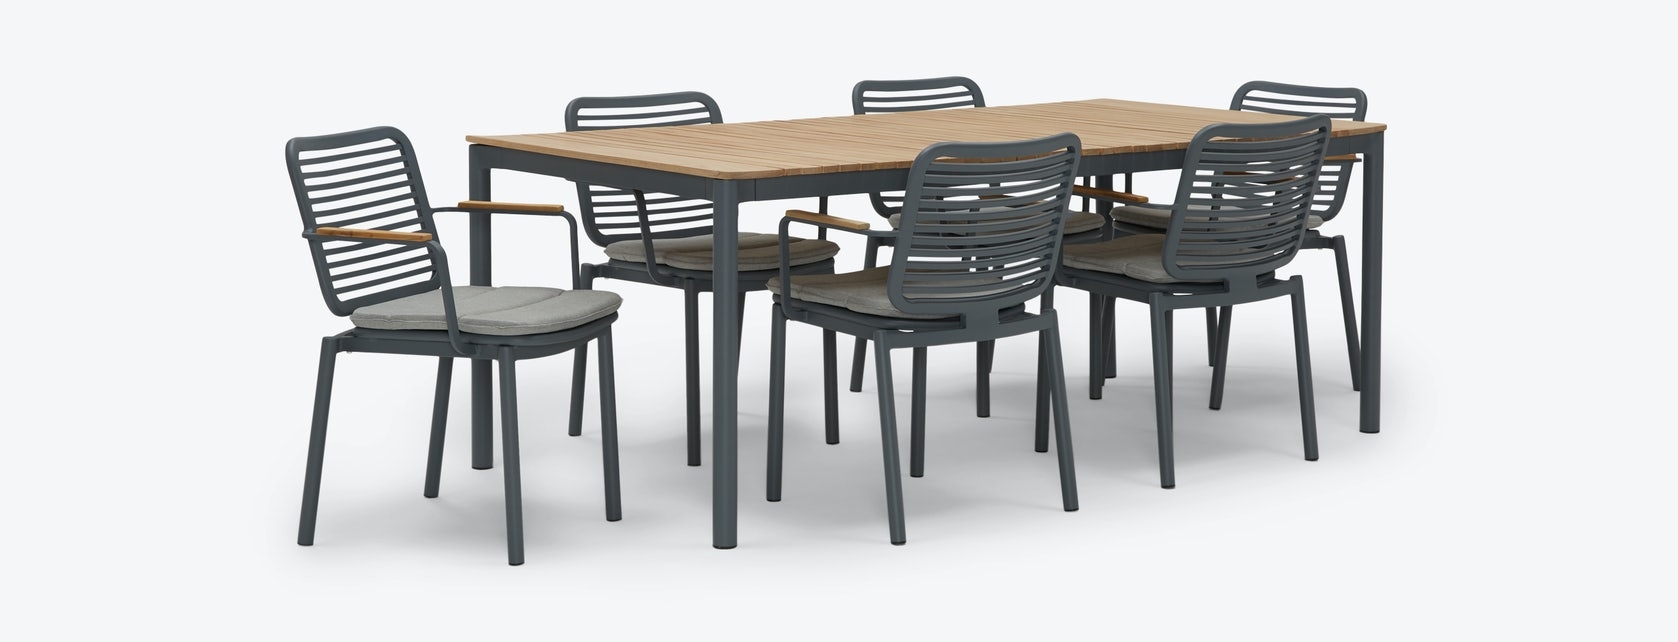 Kinsey Outdoor Dining Table - Image 1